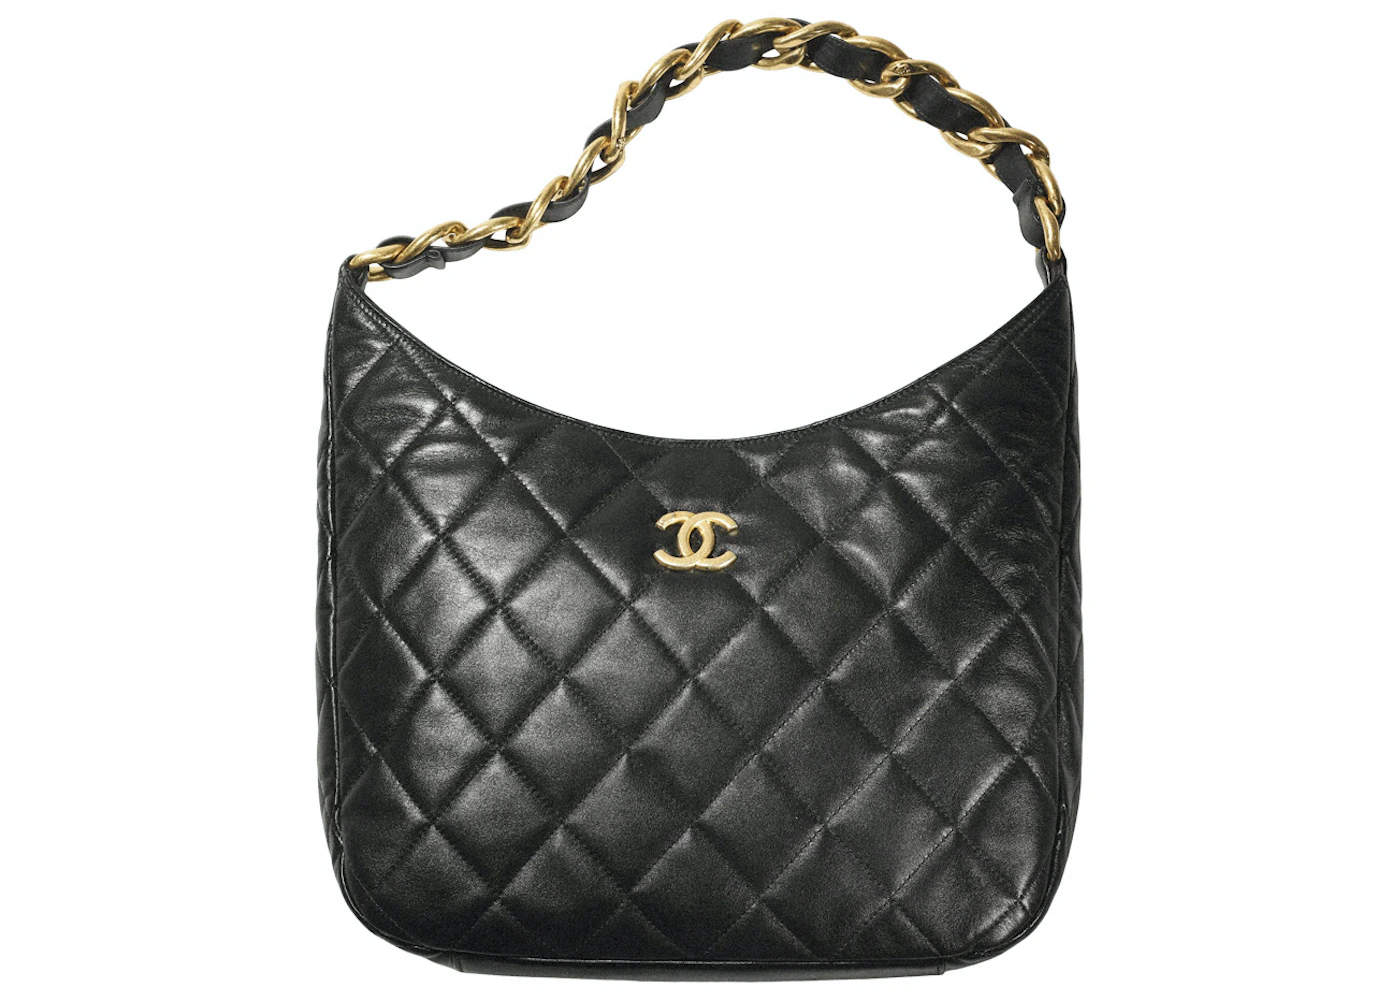 chanel black purse with gold chain extra large